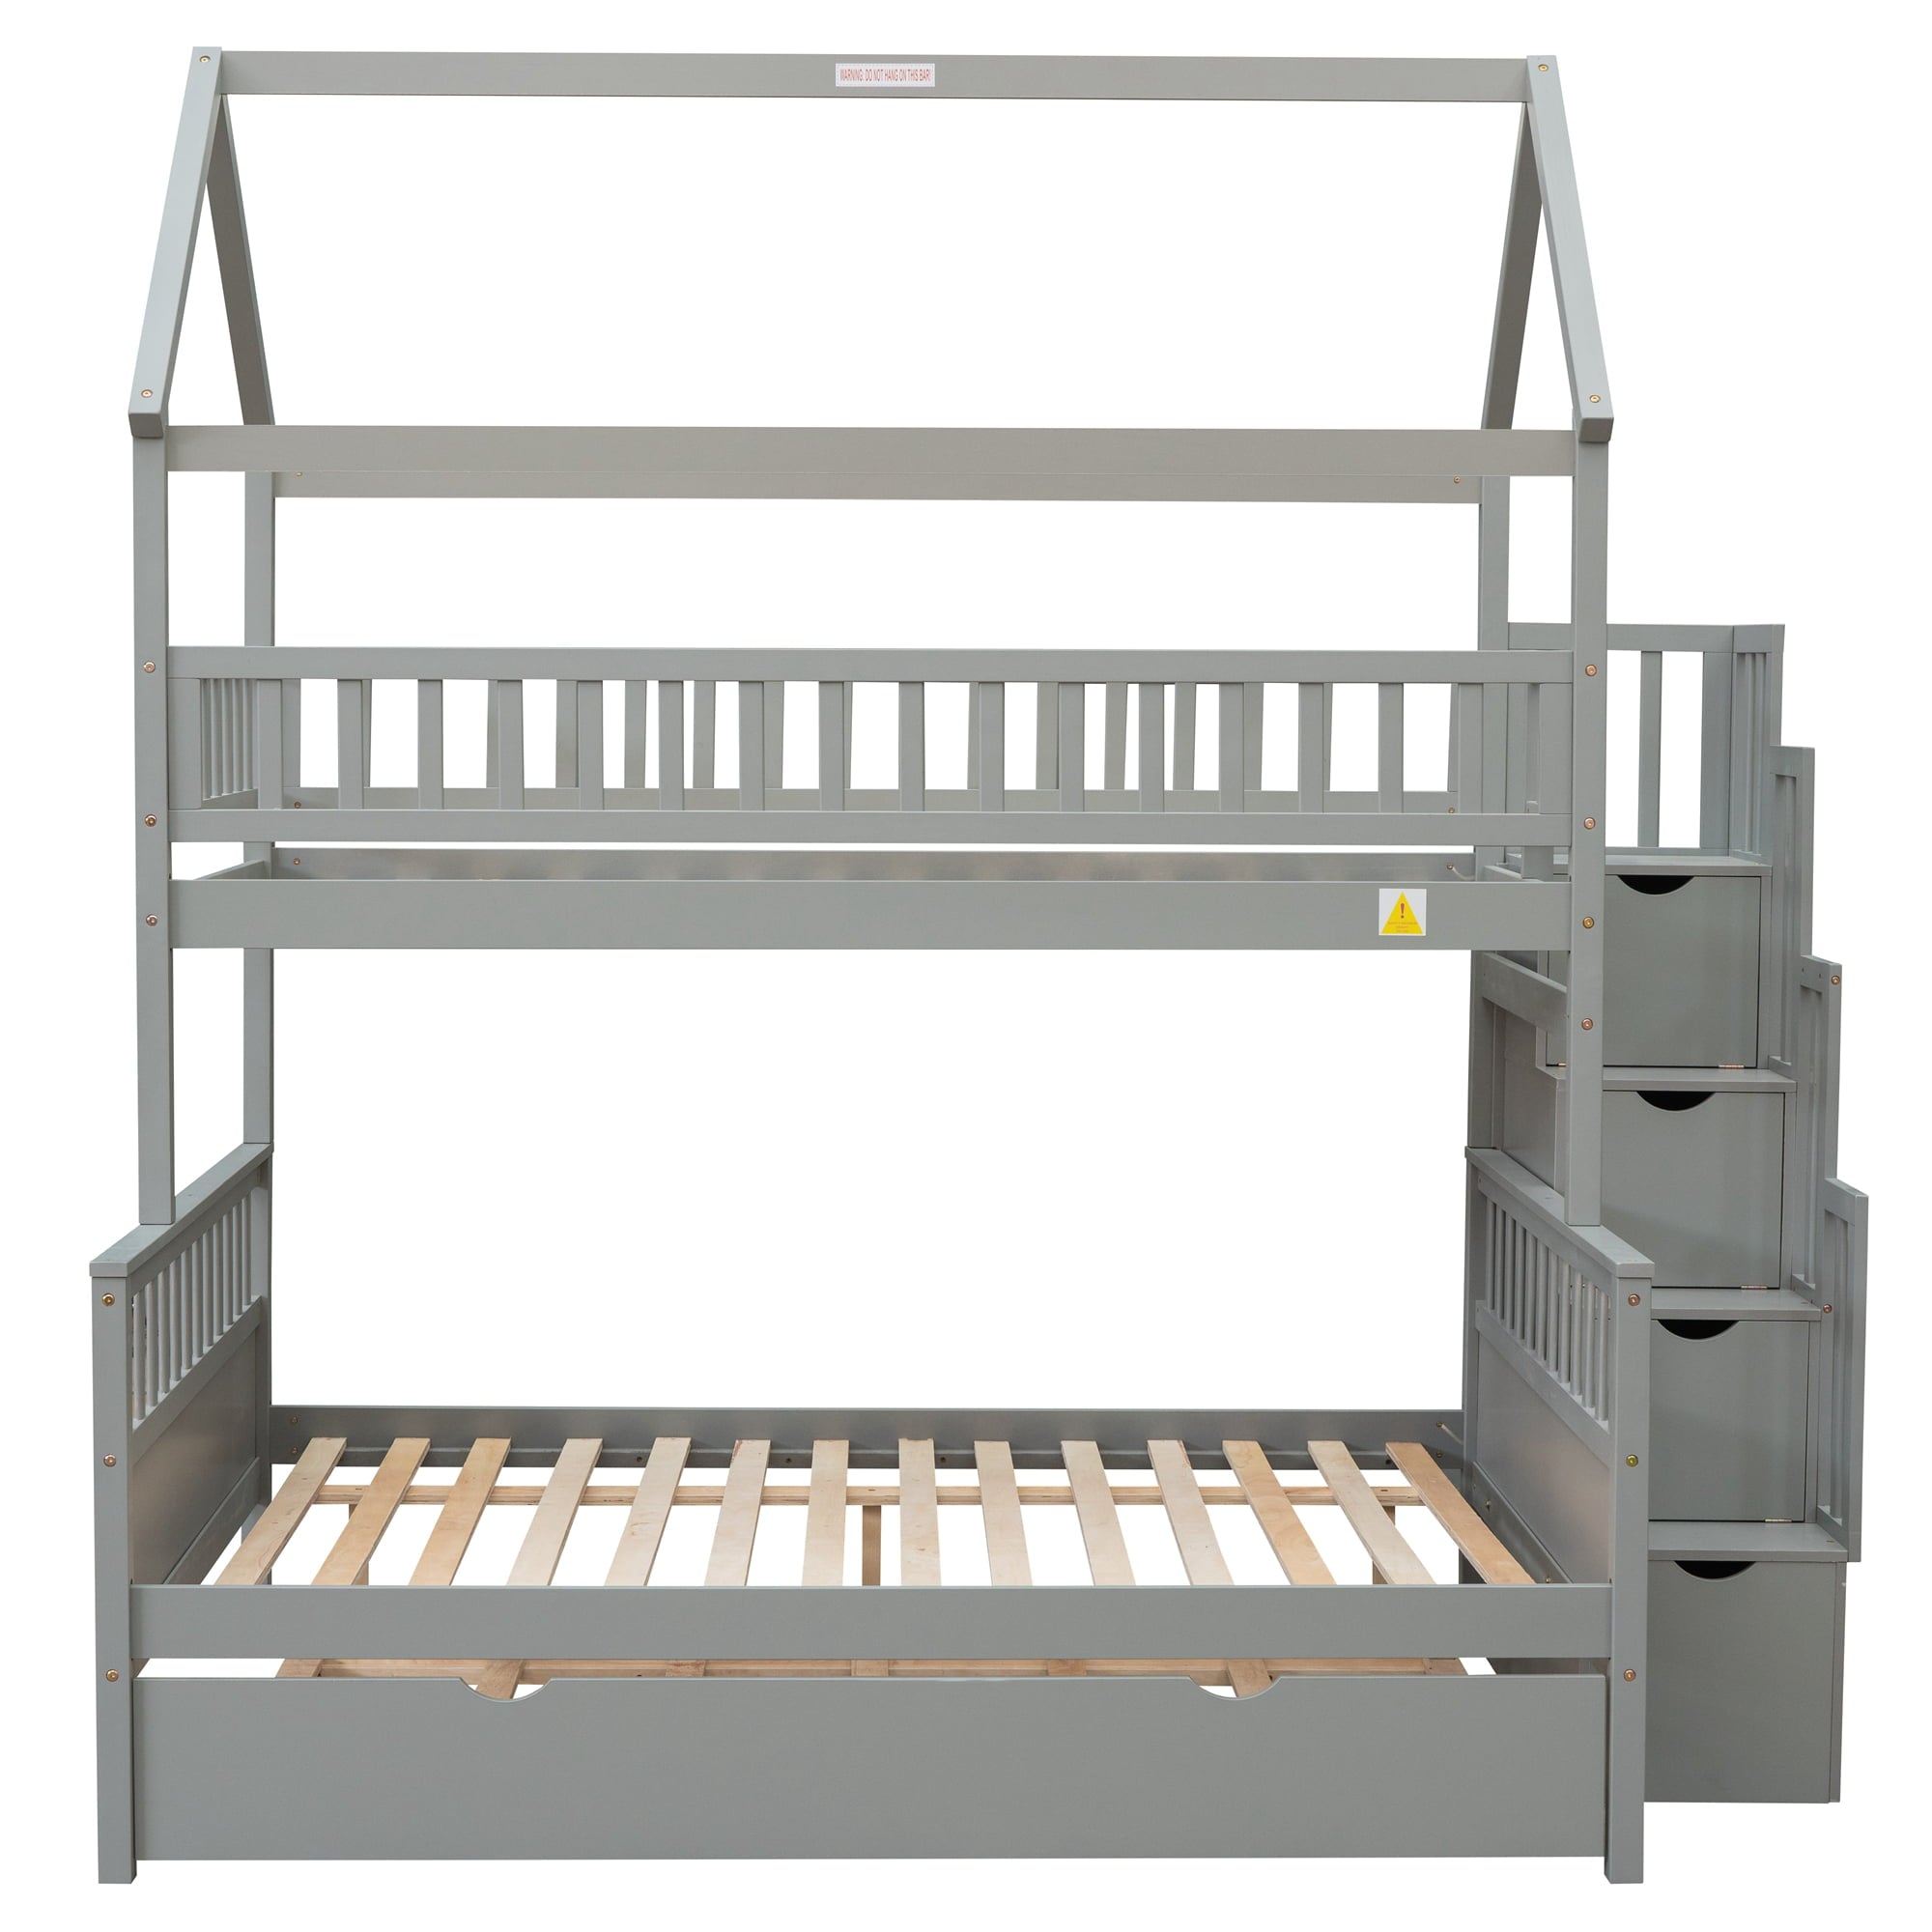 EUROCO Twin over Full House Bunk Bed with Trundle for Kids, Gray